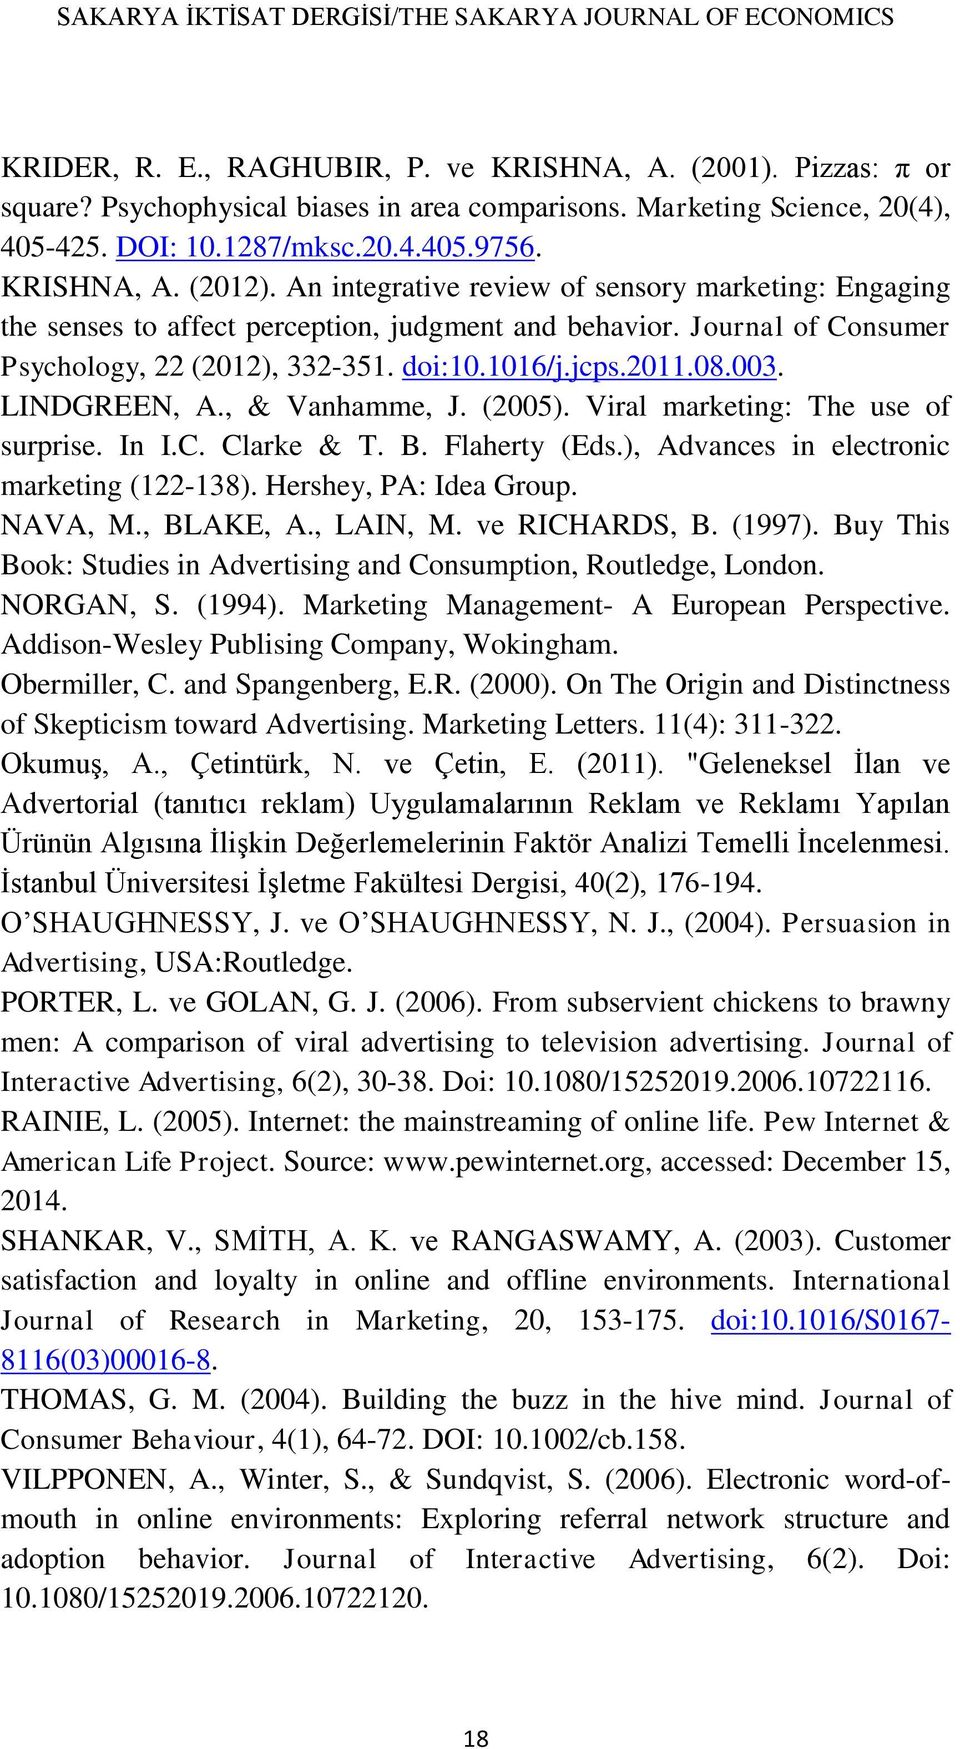 Journal of Consumer Psychology, 22 (2012), 332-351. doi:10.1016/j.jcps.2011.08.003. LINDGREEN, A., & Vanhamme, J. (2005). Viral marketing: The use of surprise. In I.C. Clarke & T. B. Flaherty (Eds.